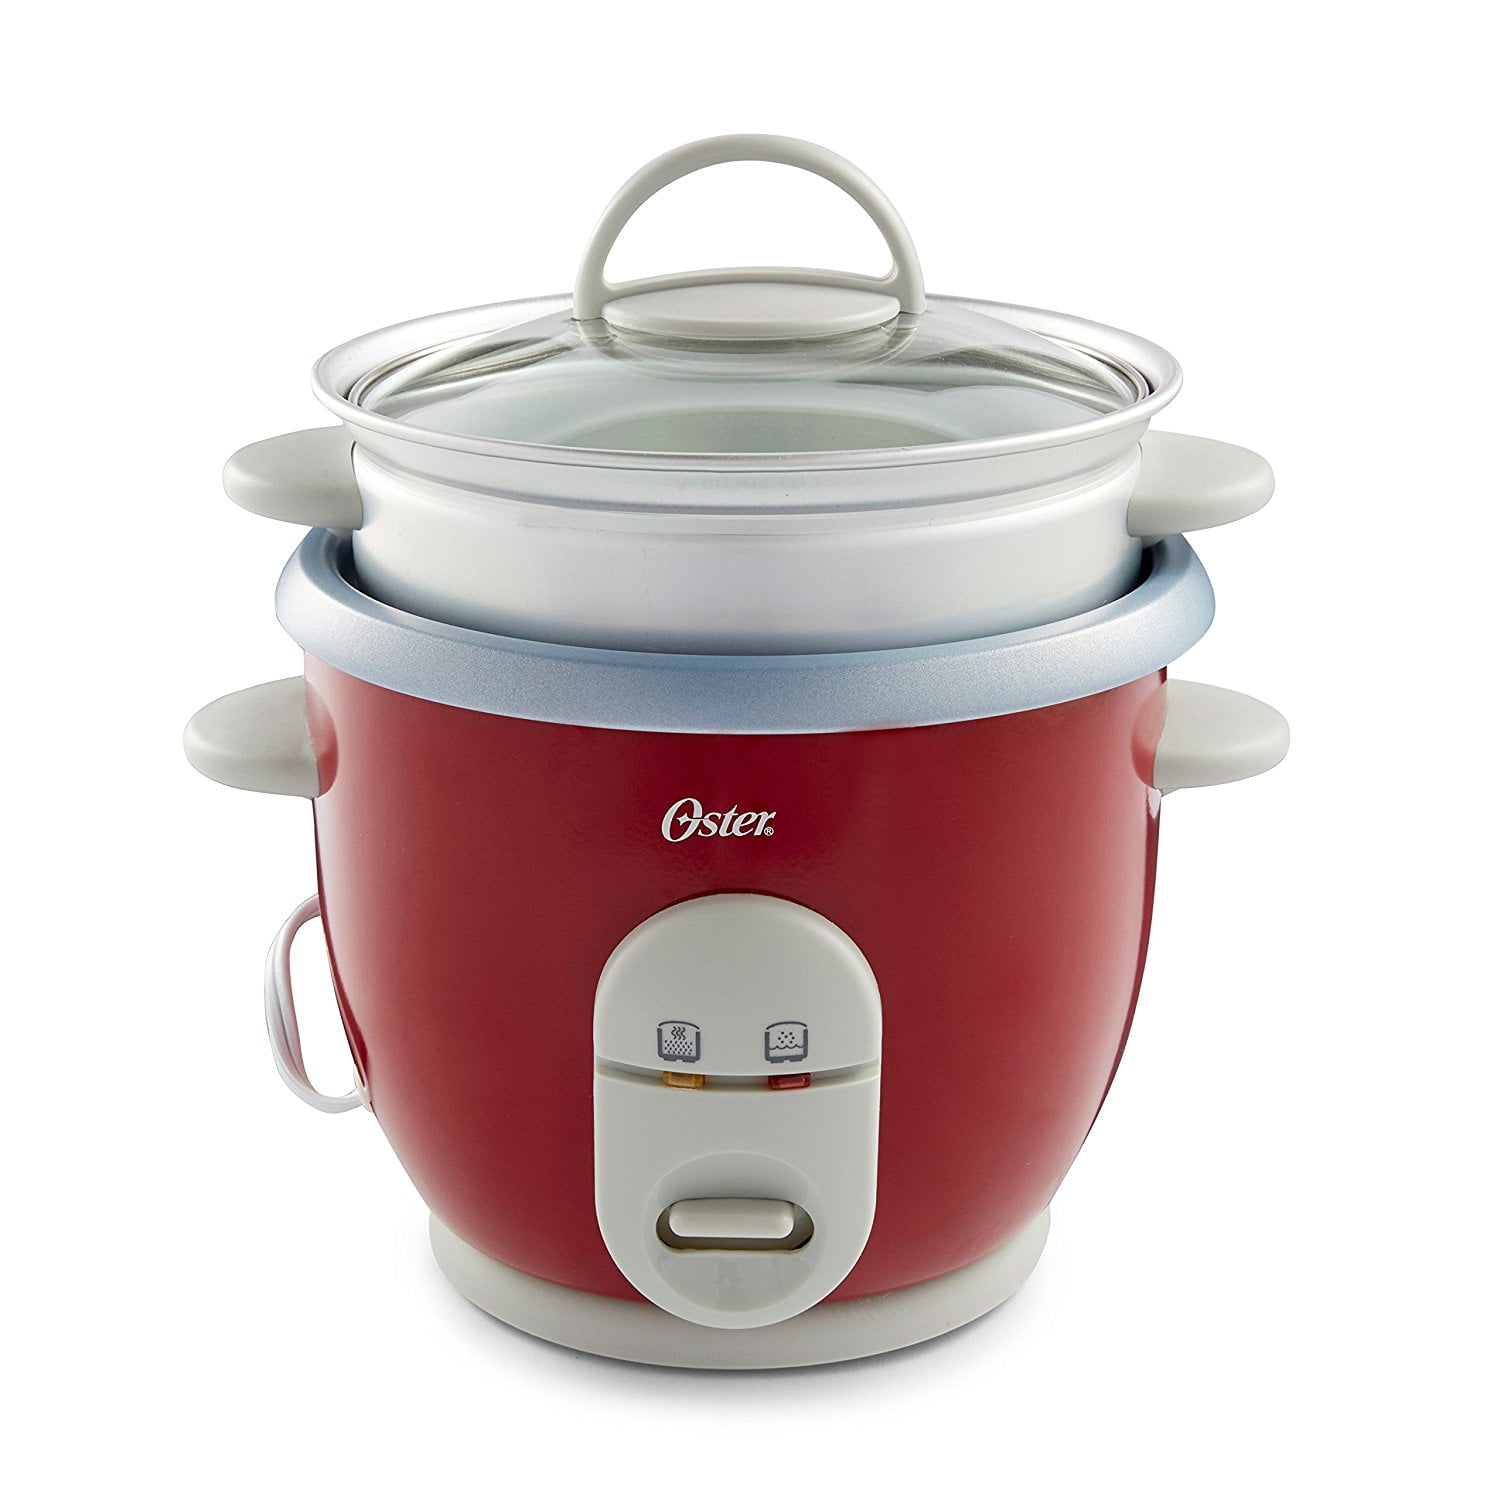 Oster 6-Cup Rice Cooker and Steamer, 4722 - Walmart.com